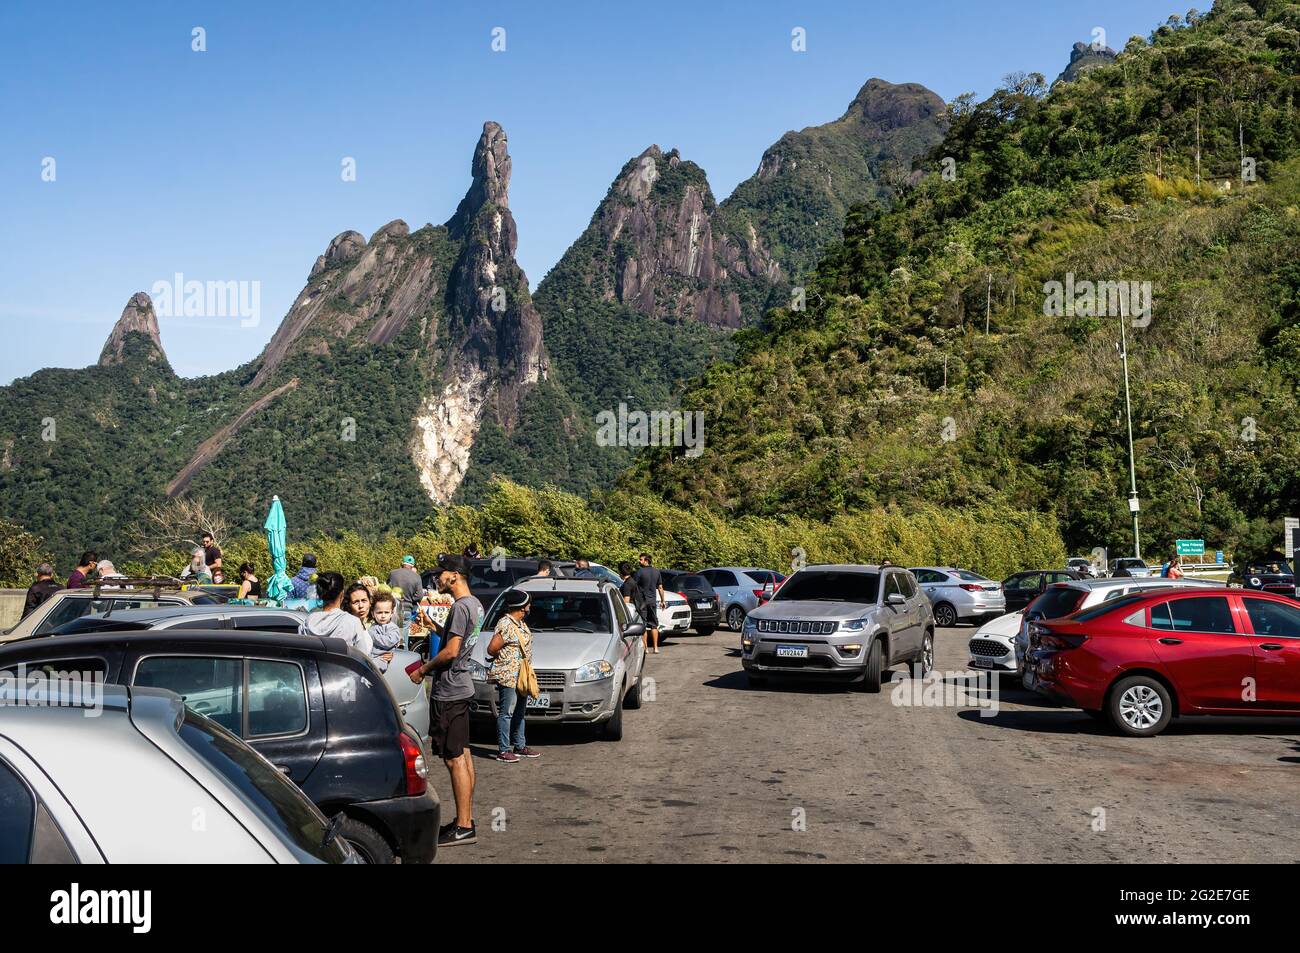 Parking area of Soberbo viewing spot at Rio-Teresopolis highway (BR-116) with Our Lady finger, God's Finger and Cabeca de Peixe peaks at the back. Stock Photo